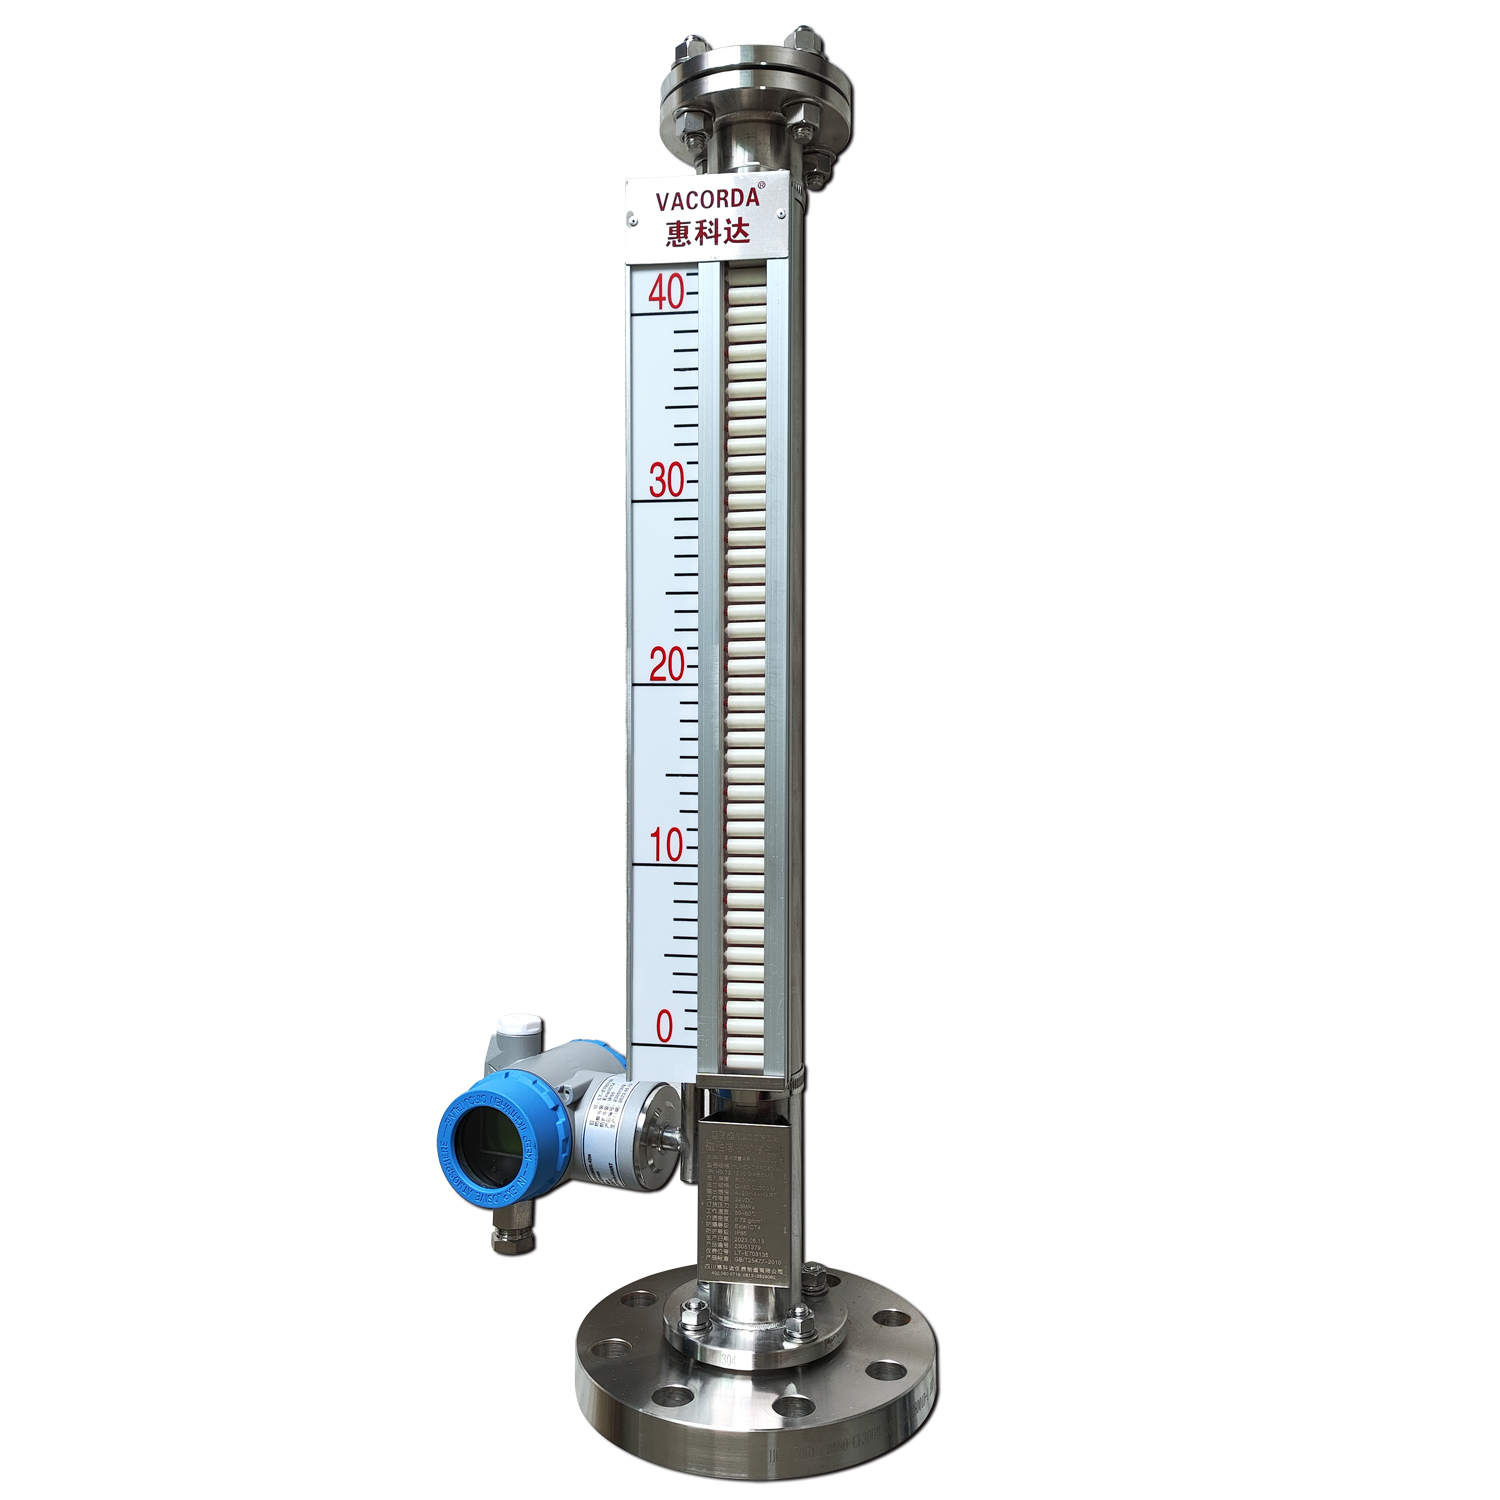 Vacorda UHC Magnetic Level Gauge Top Mounted Tank Level Meter With Solar Powered LED Display